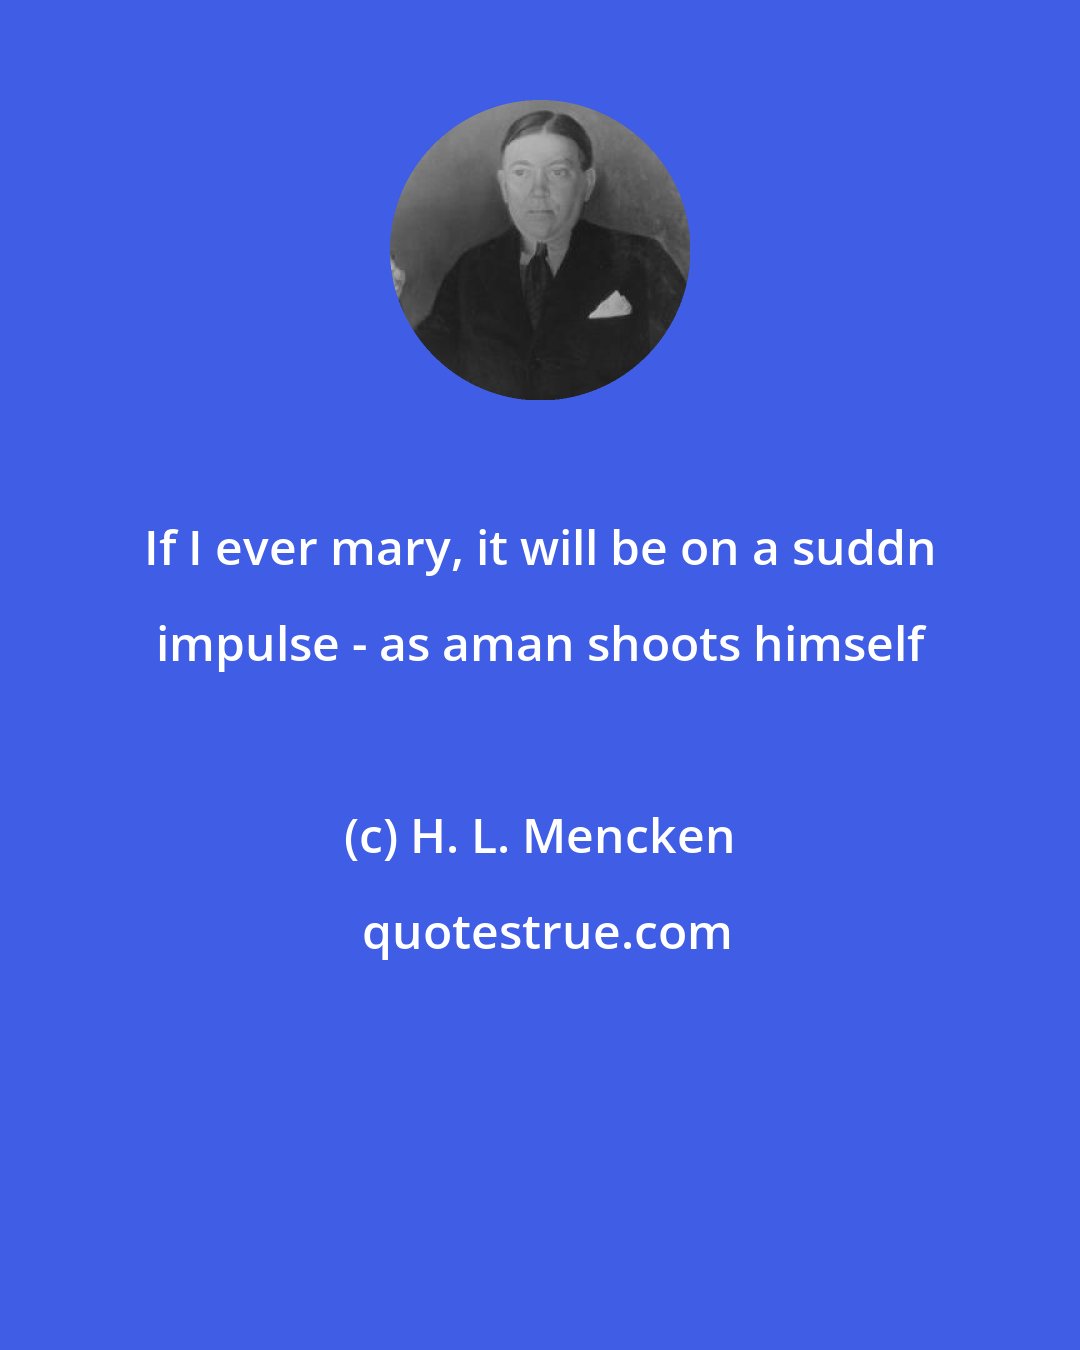 H. L. Mencken: If I ever mary, it will be on a suddn impulse - as aman shoots himself